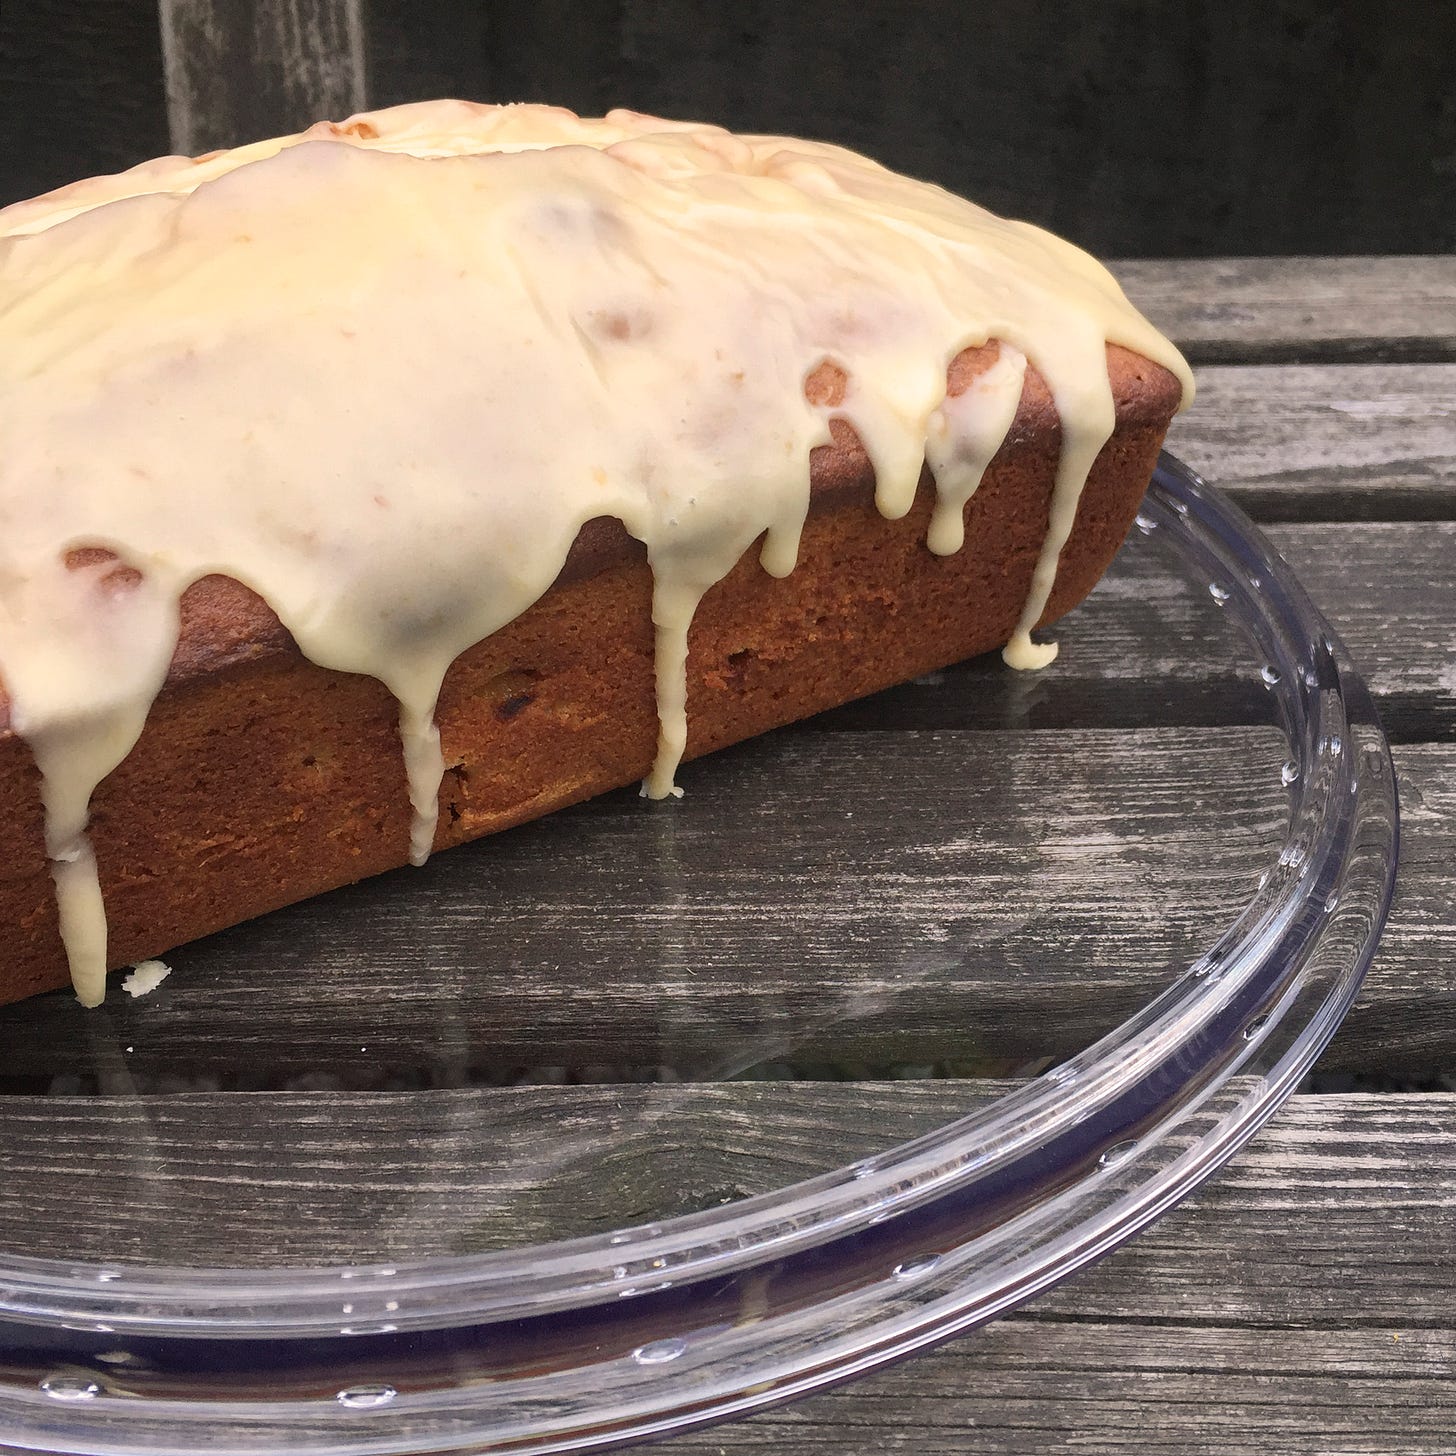 On a wooden bench sits a clear glass cake plate. On it is a loaf-shaped poundcake, lightly browned and covered in a peachy glaze that has dripped artfully down the sides.